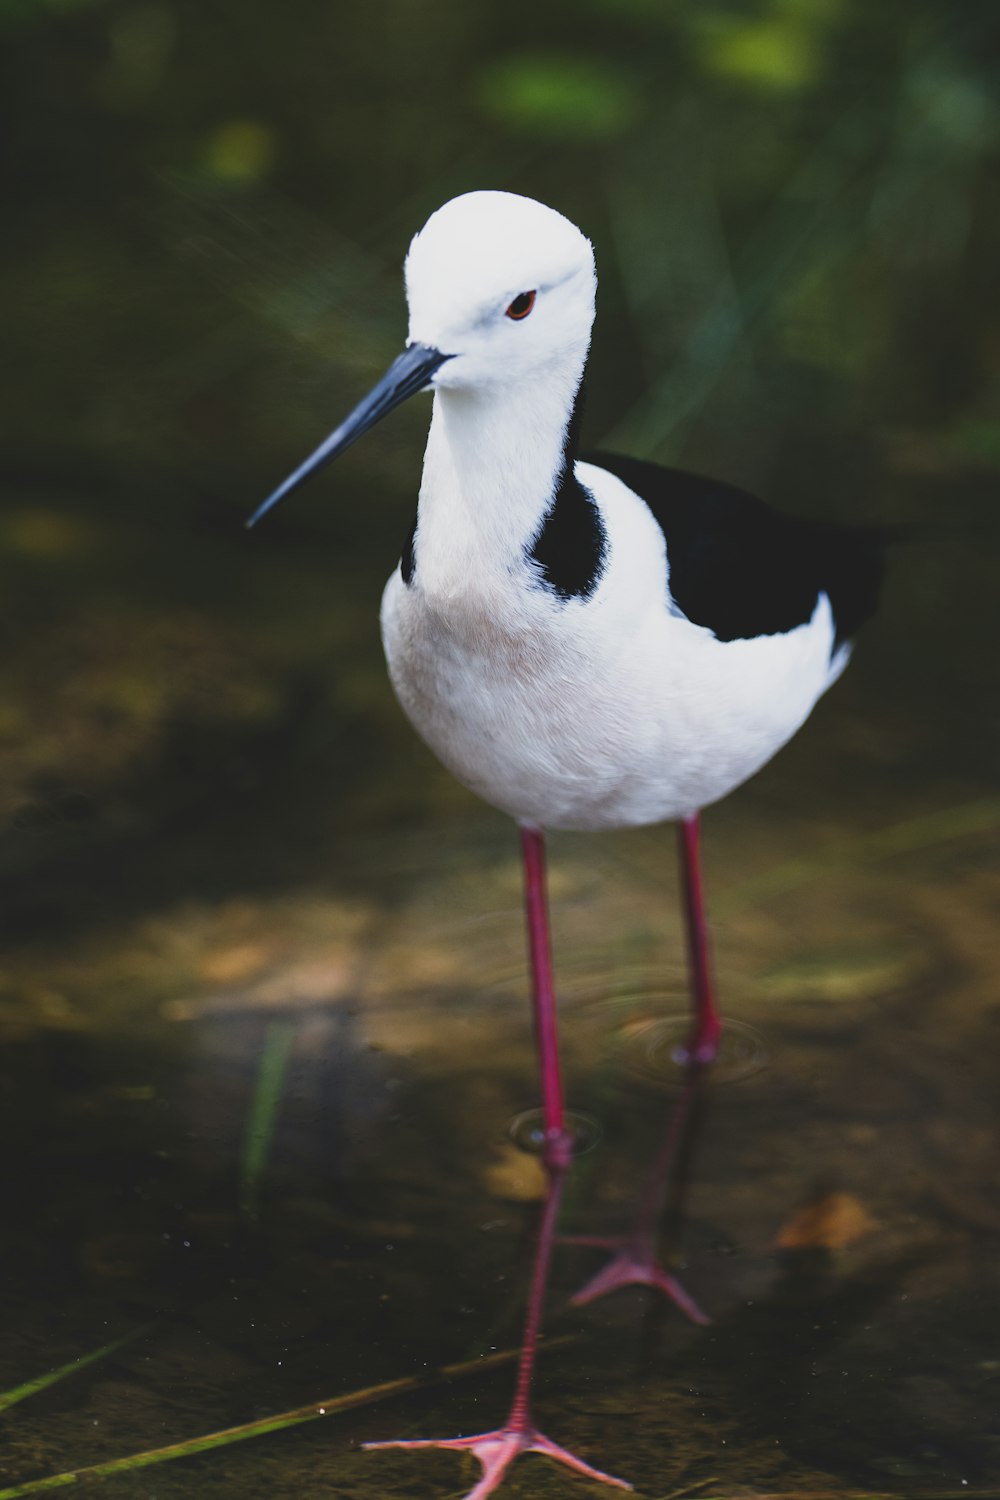 a black and white bird standing in water